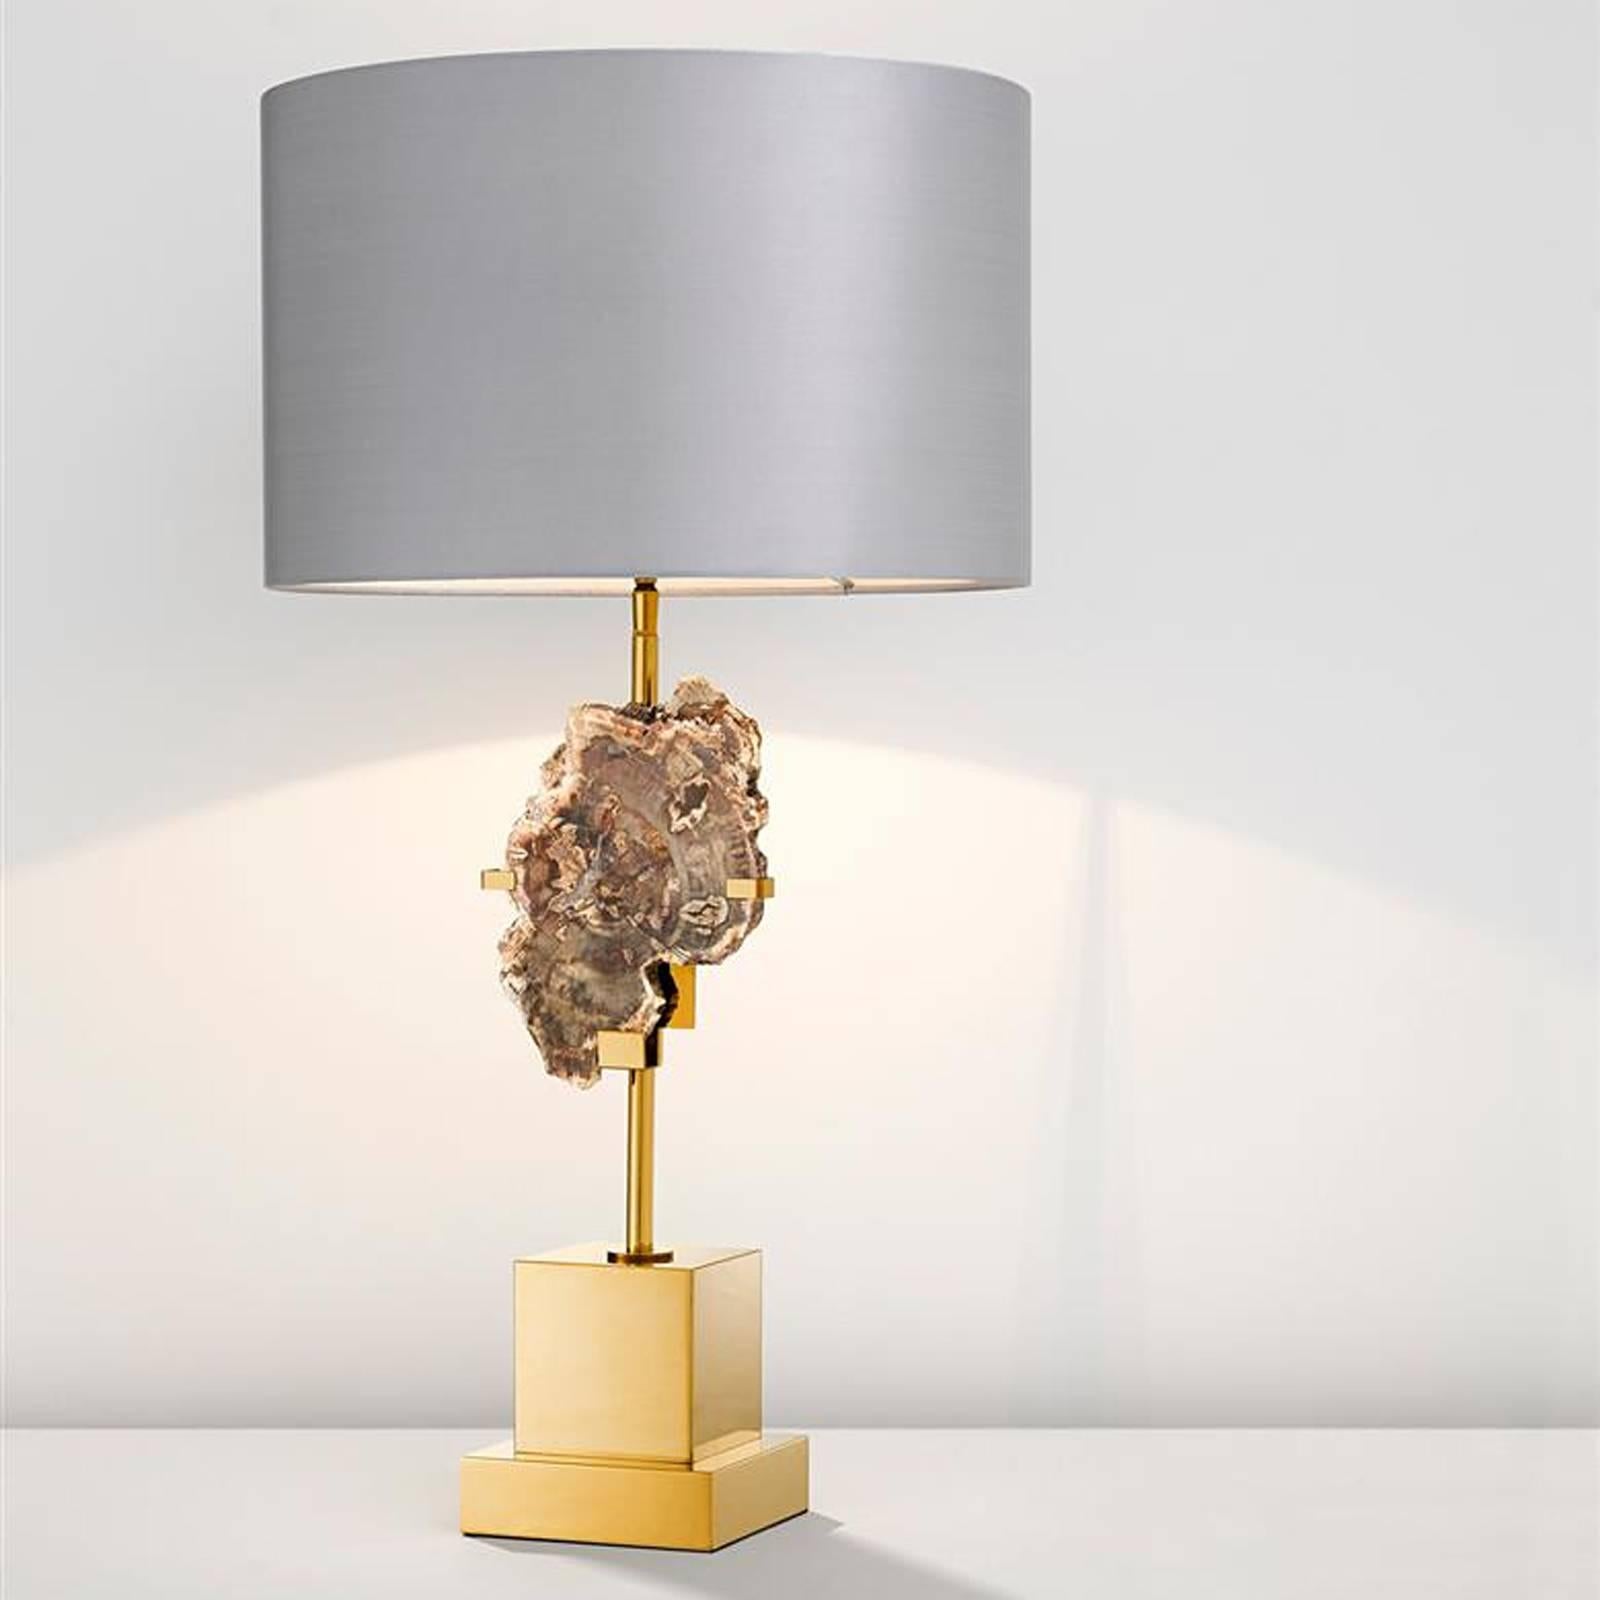 Table lamp Dominus in gold finish with
petrified wood. Including silver grey shade.
One bulb lamp holder type E27, maximum 40 Watt.
